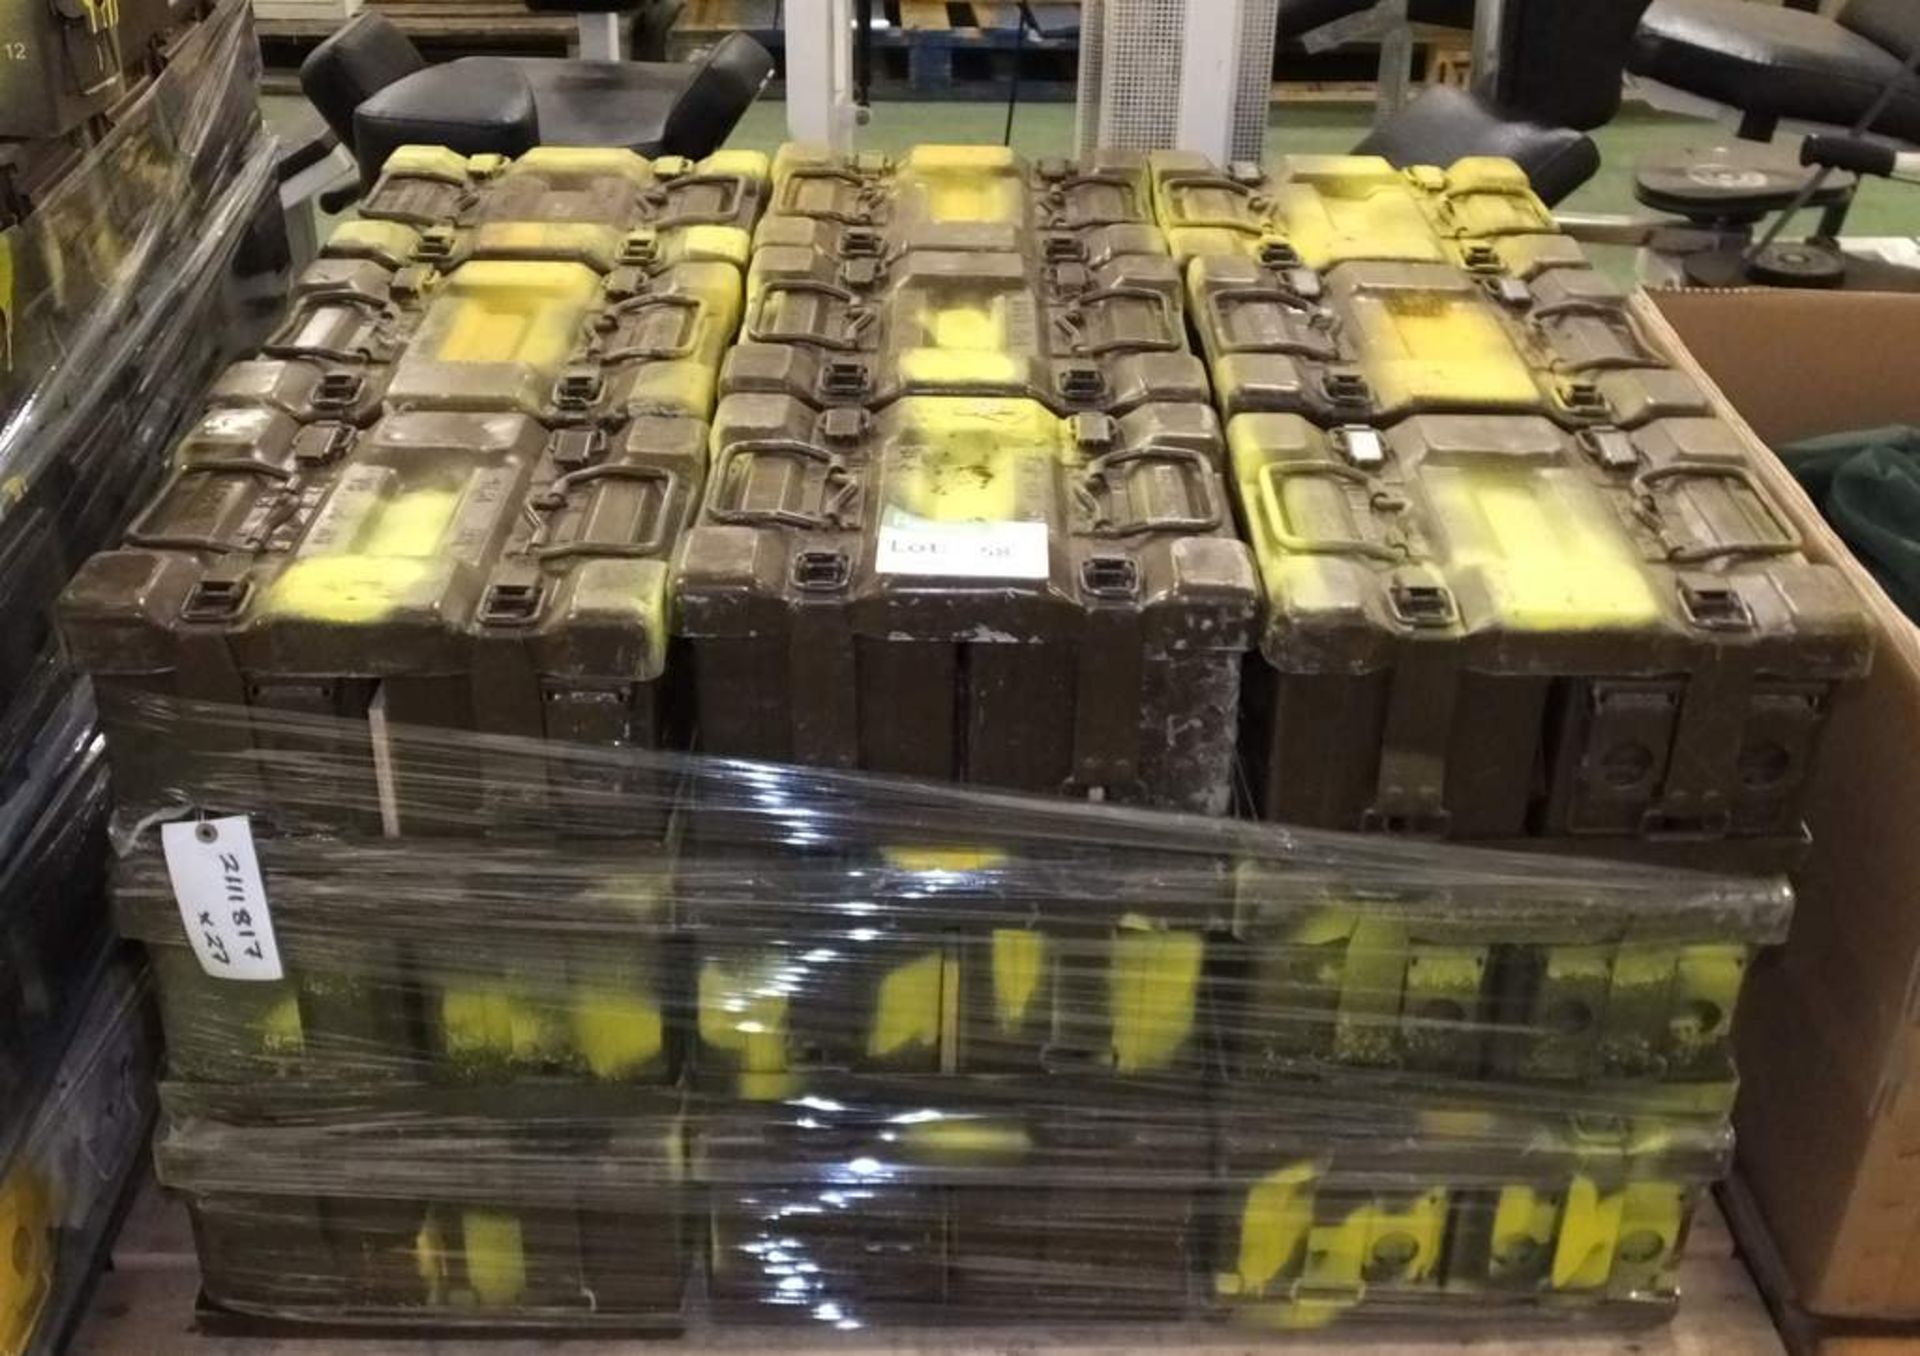 27x L43A1 ammo containers